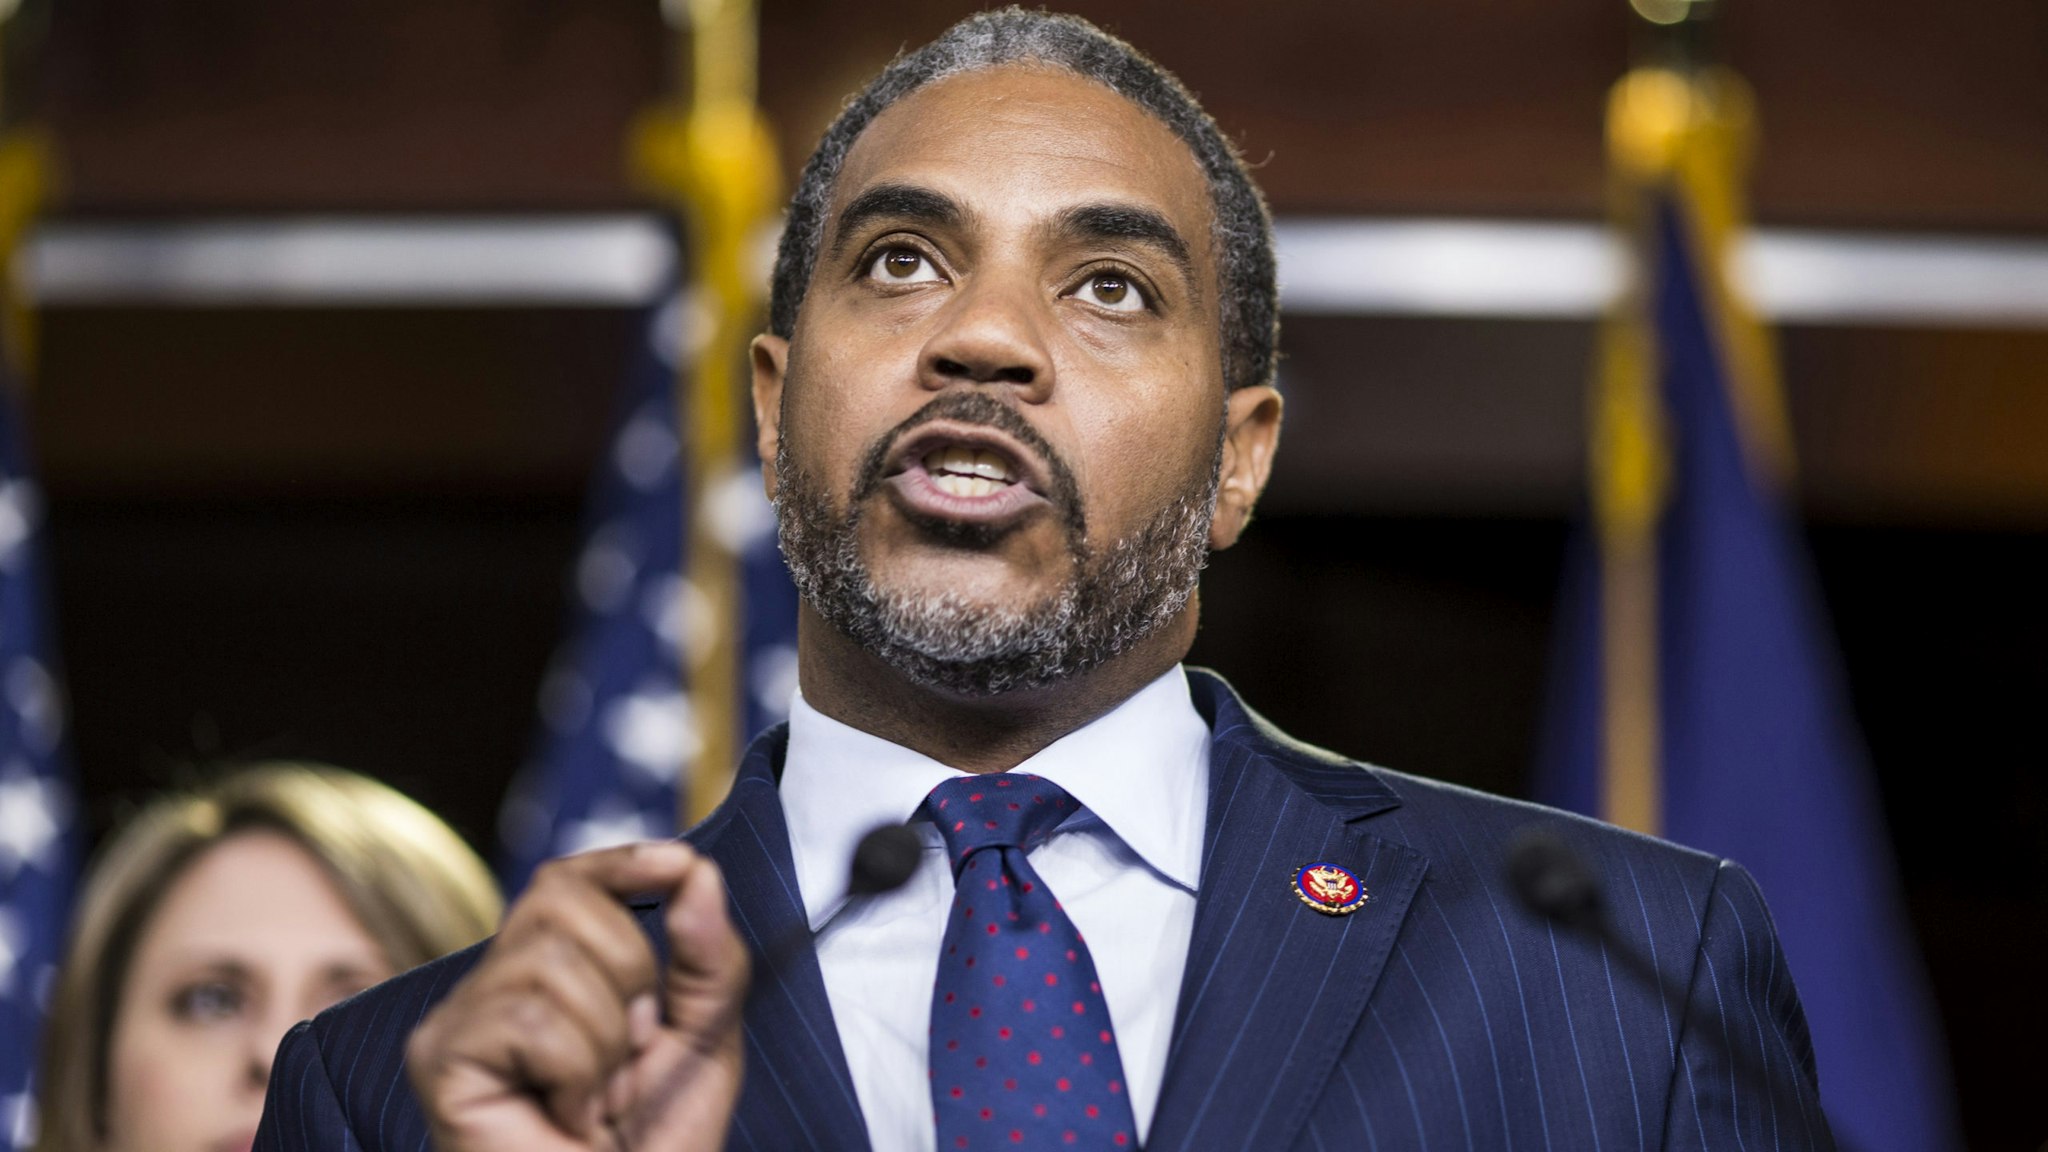 WASHINGTON, DC - APRIL 09: Rep. Steven Horsford (D-NV) speaks during a news conference on April 9, 2019 in Washington, DC. House Democrats unveiled new letters to the Attorney General, HHS Secretary, and the White House demanding the production of documents related to Americans health care in the Texas v. United States lawsuit.